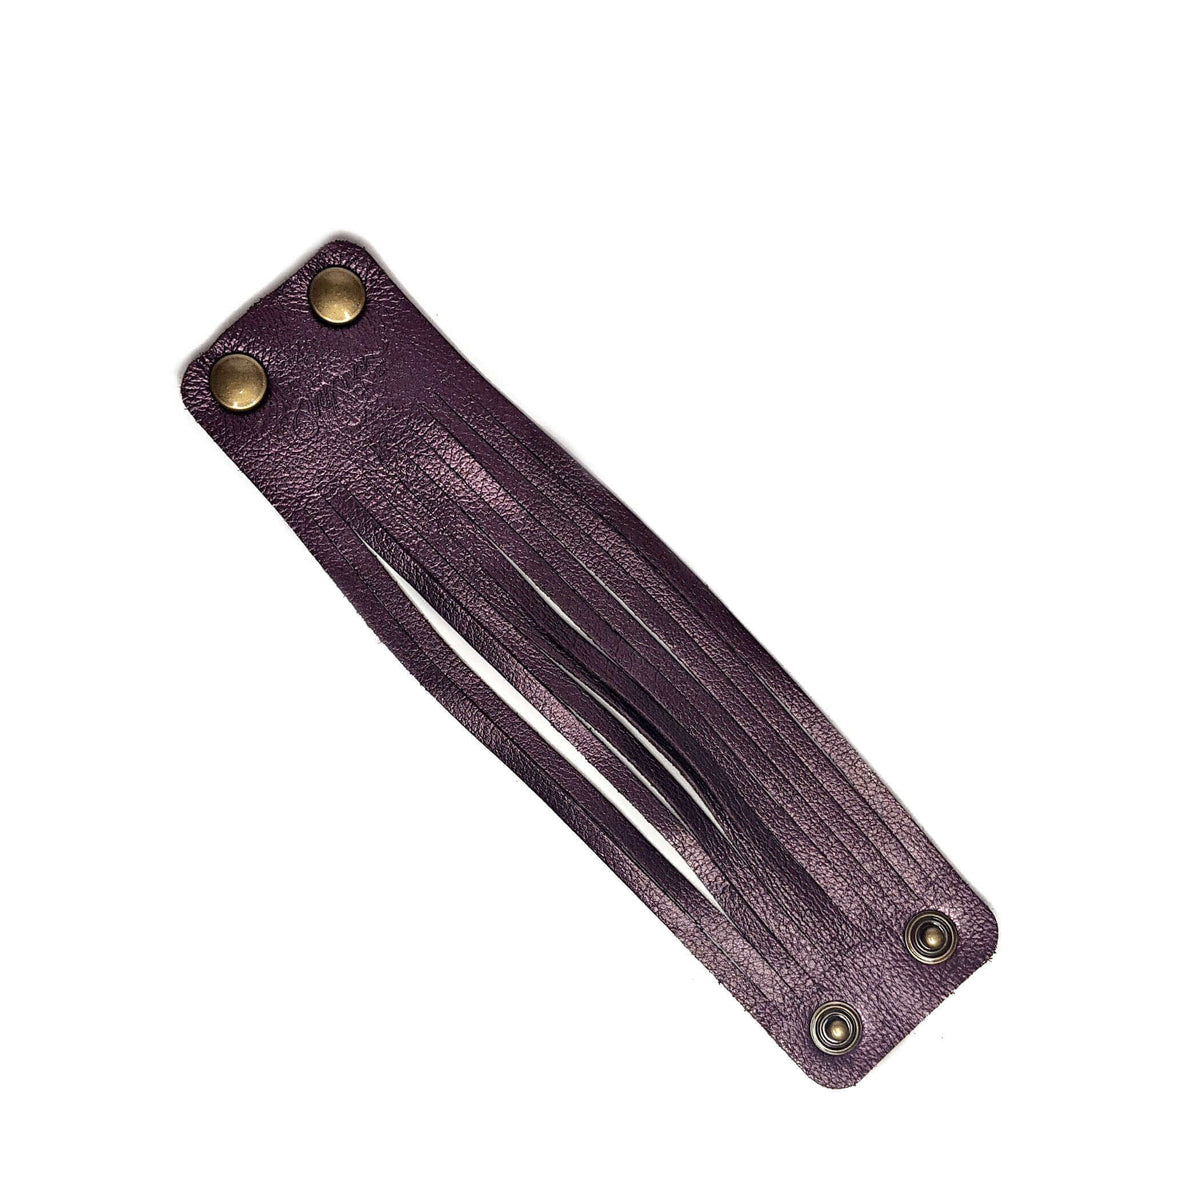 Fringe Leather Bracelet in Smoky Purple, Brynn Capella, Made in the USA